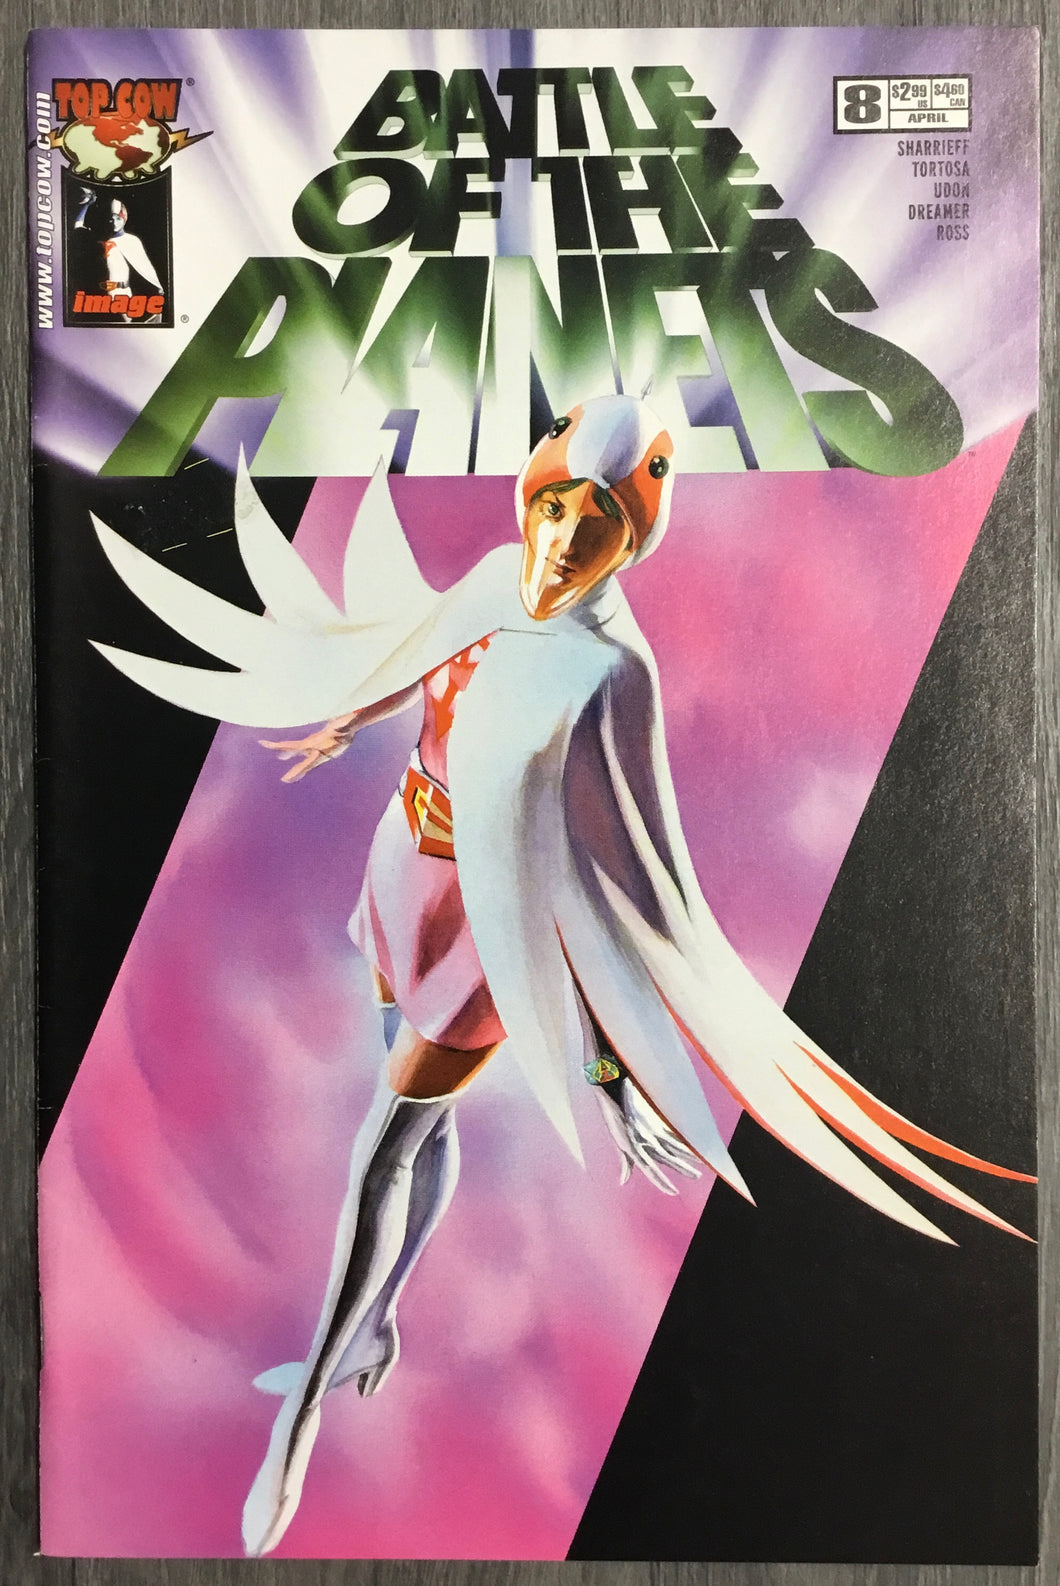 Battle of the Planets No. #8 2003 Top Cow/Image Comics